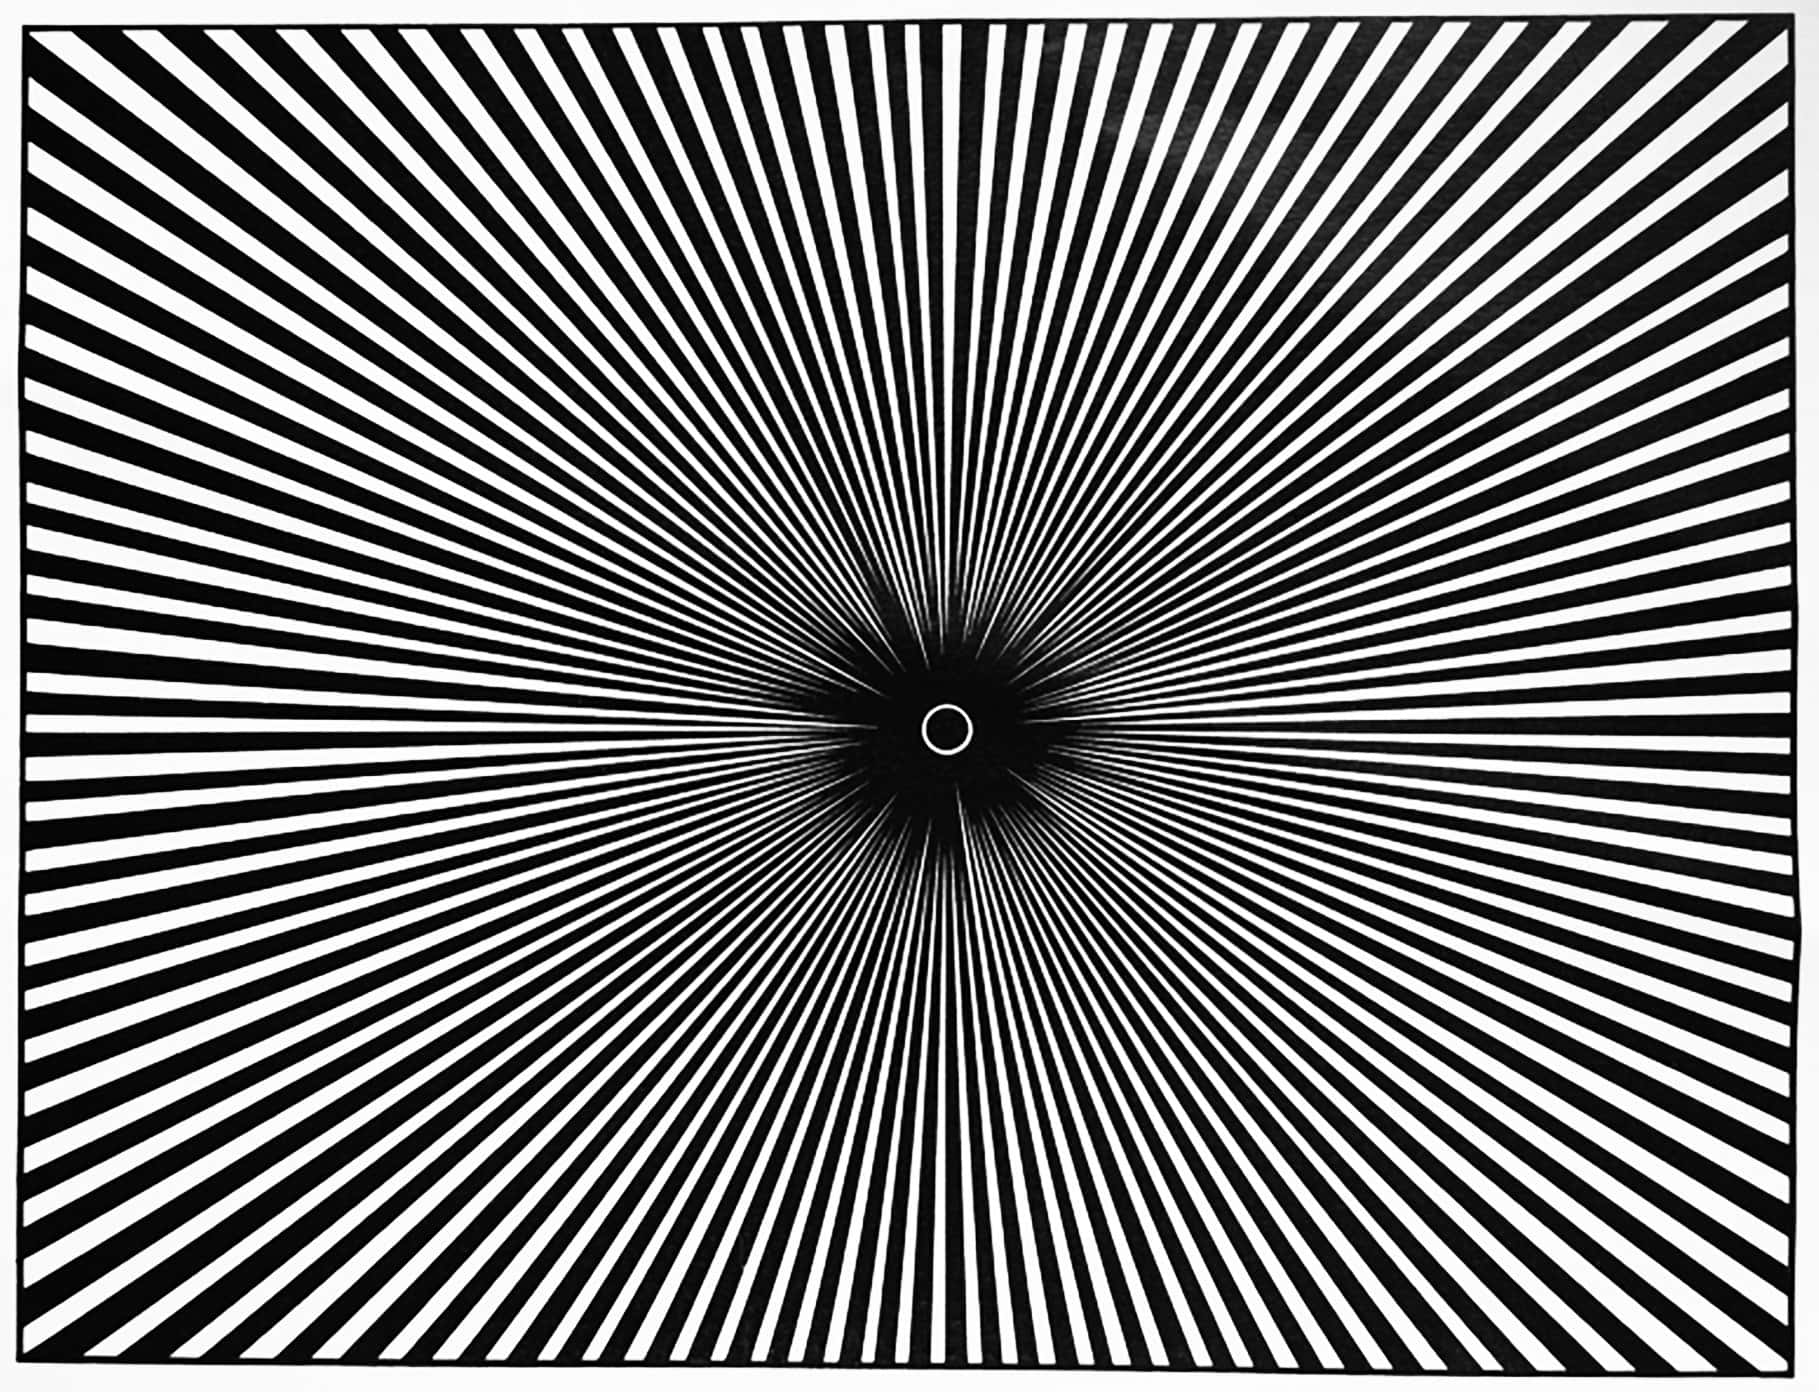 Black And White Flower Color Illusion Picture